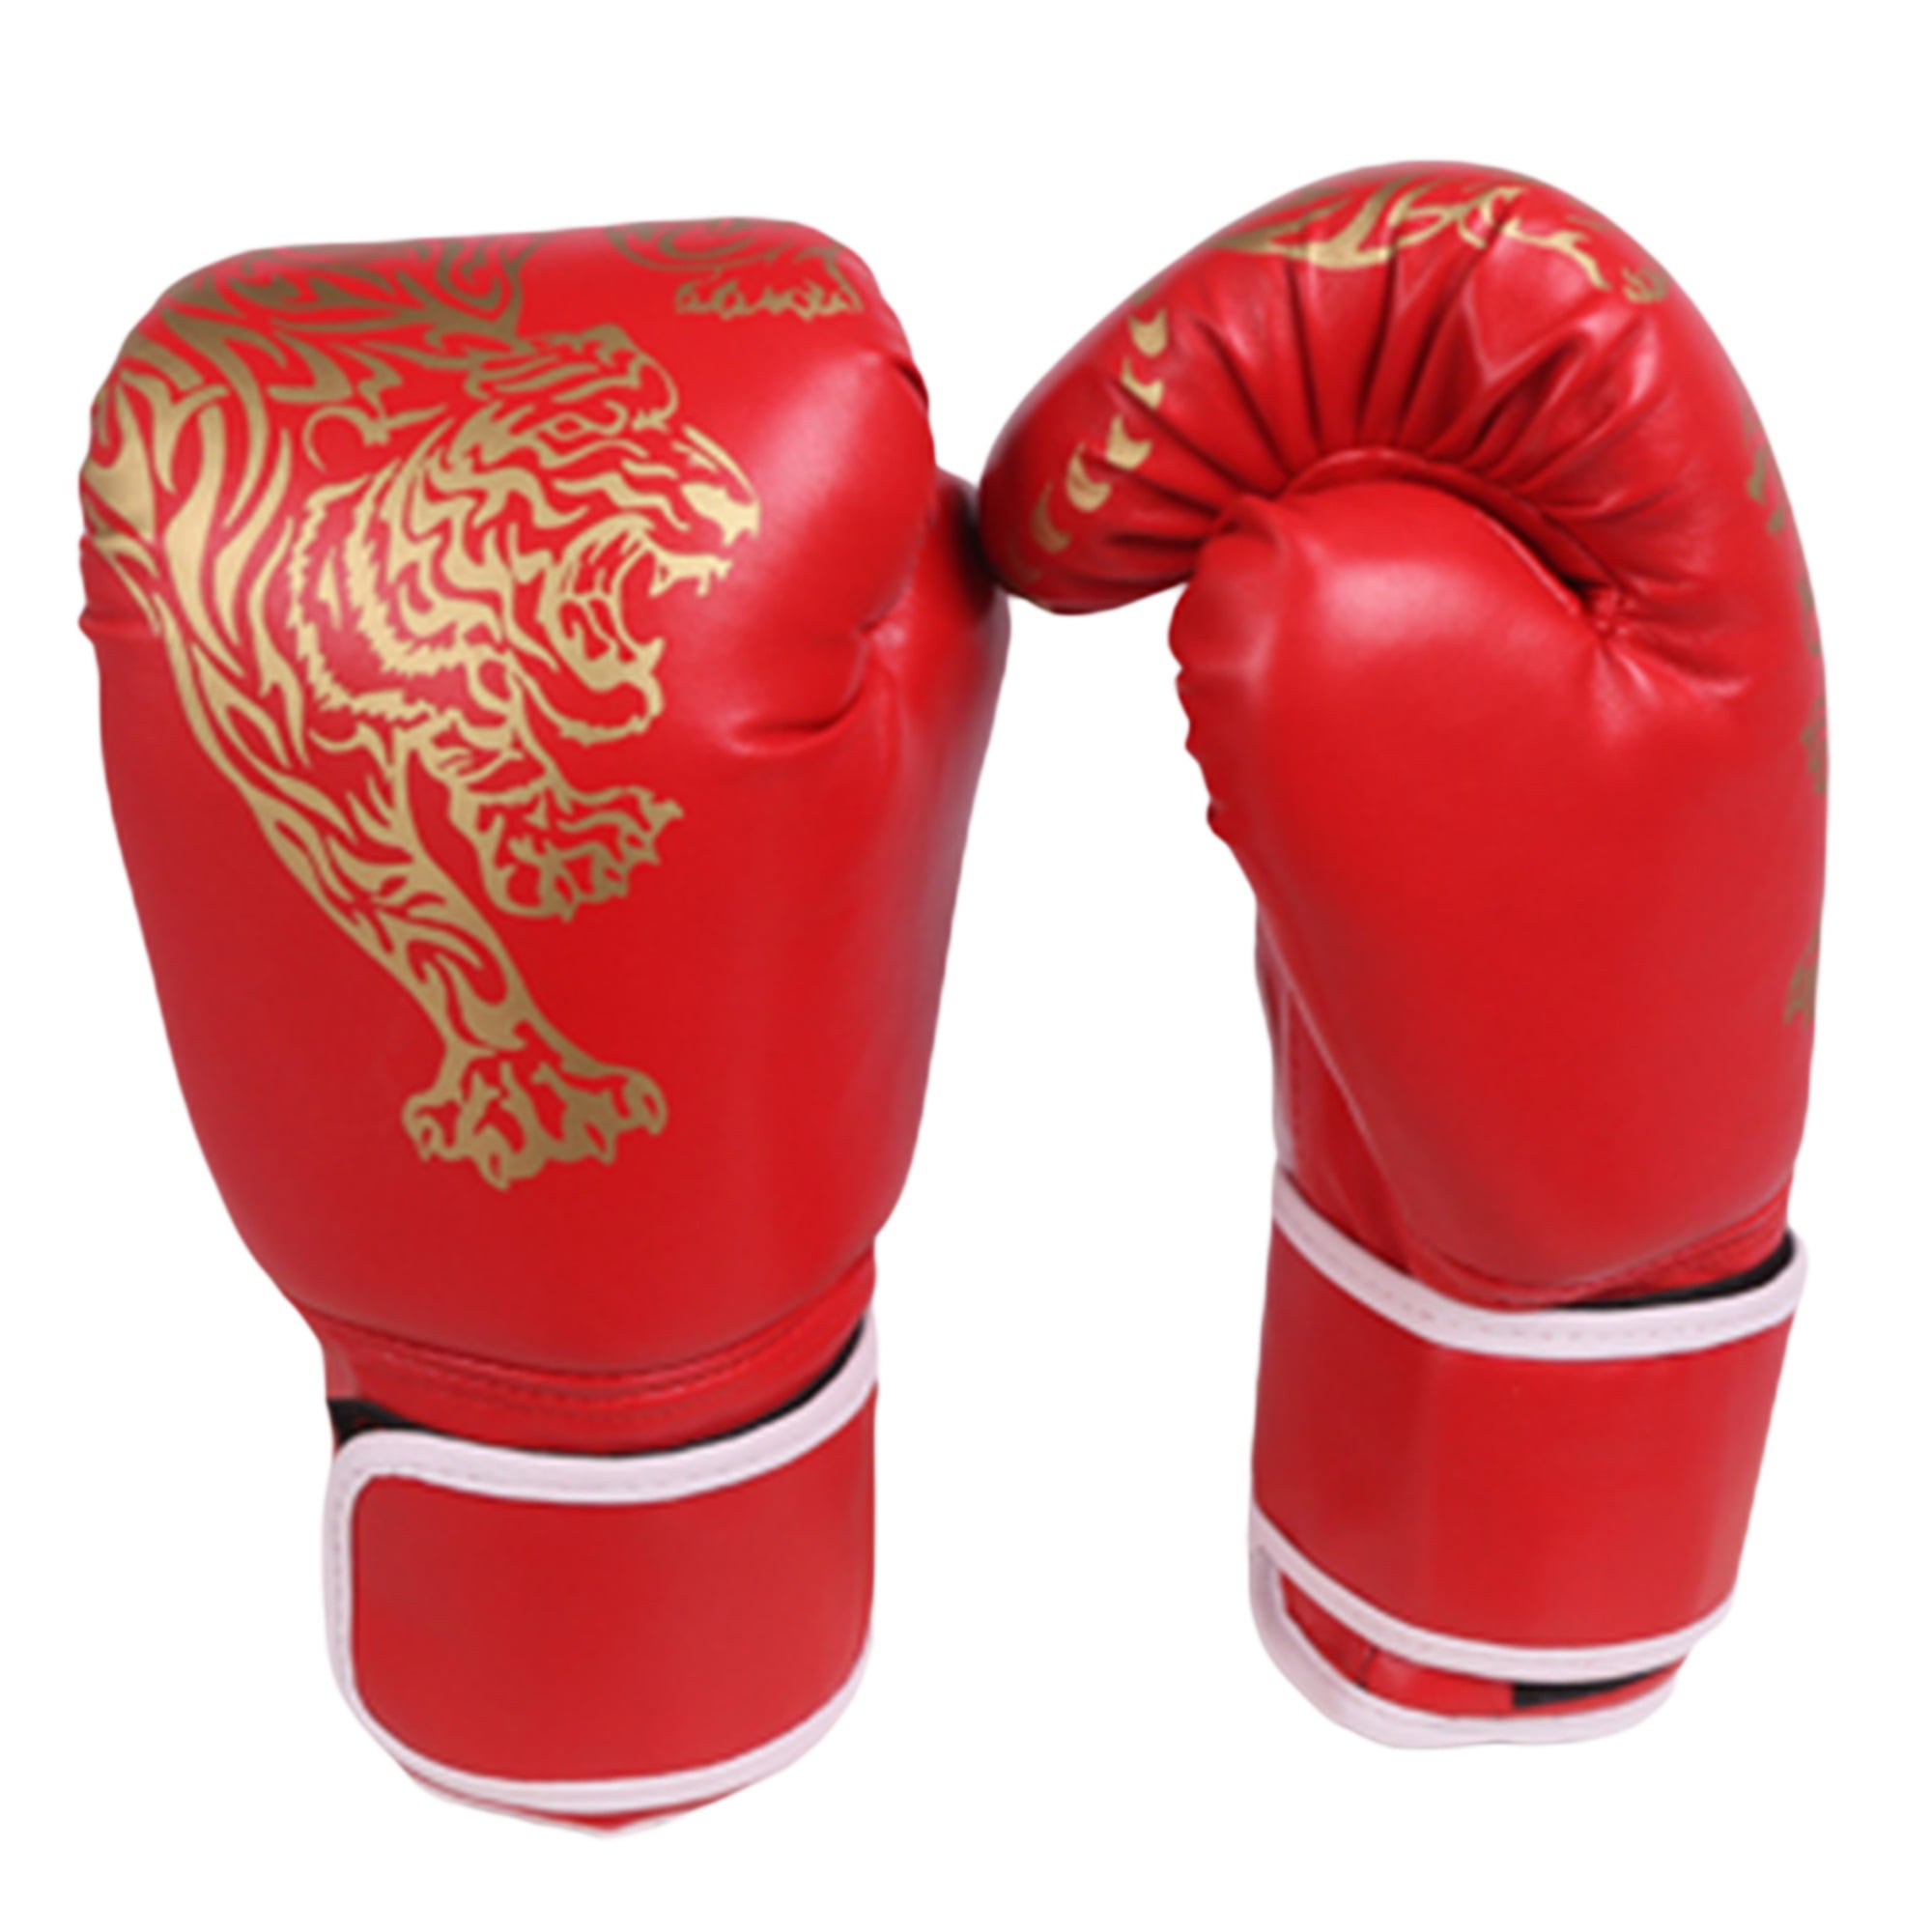 Kids & Adult Boxing Gloves Junior Punching Bag Mitts Muay thai Training Sparring 